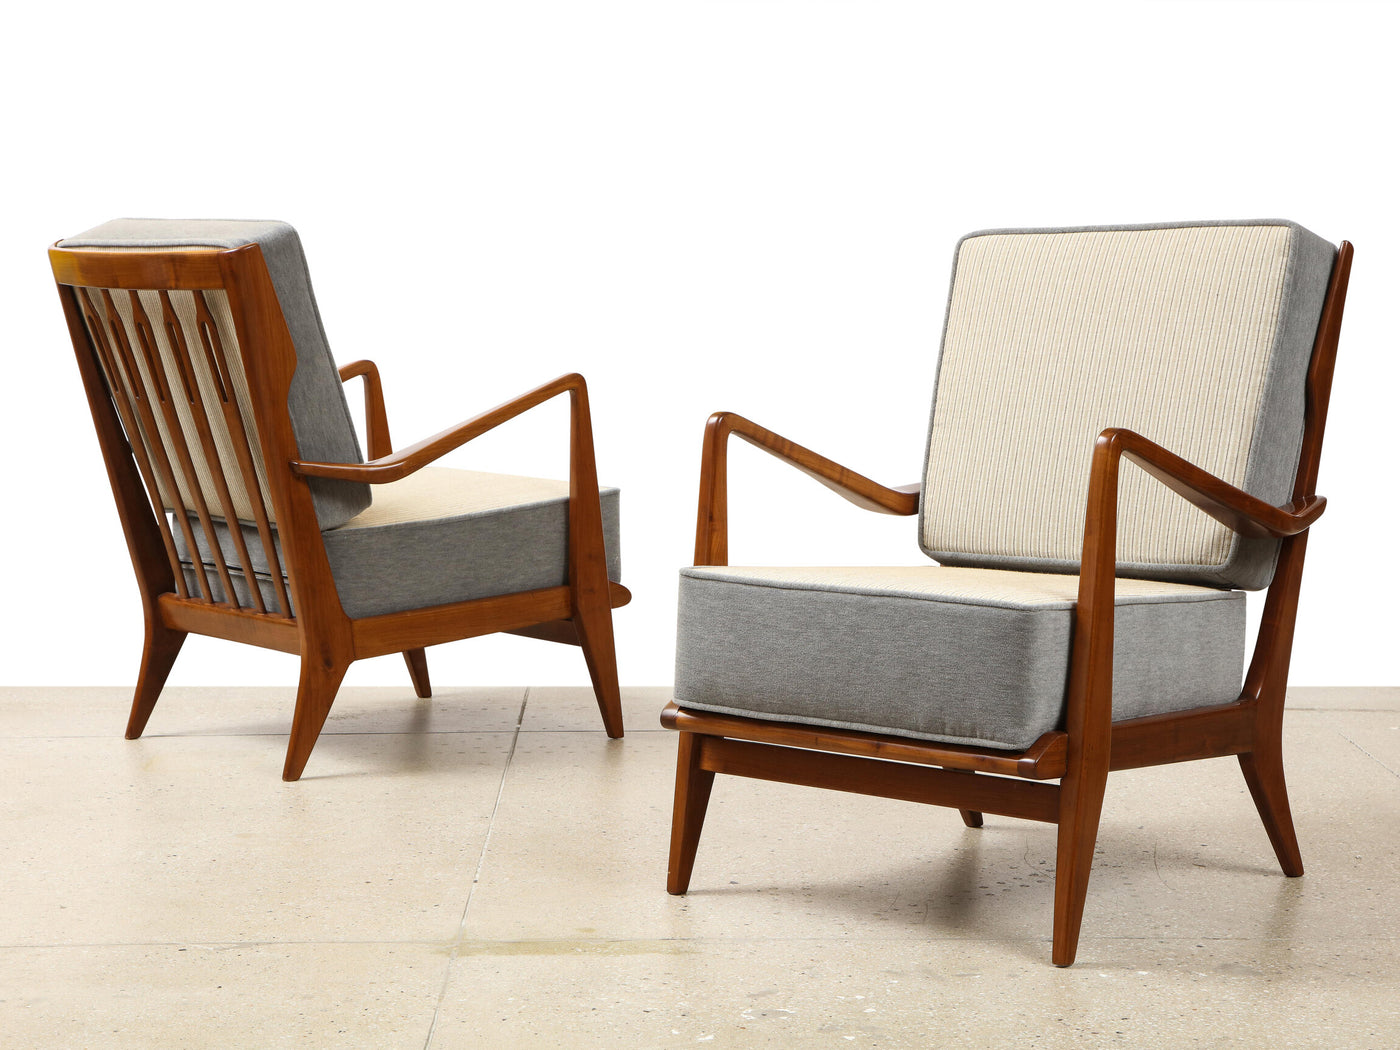 Rare Pair of Open Armchairs by Gio Ponti for Cassina